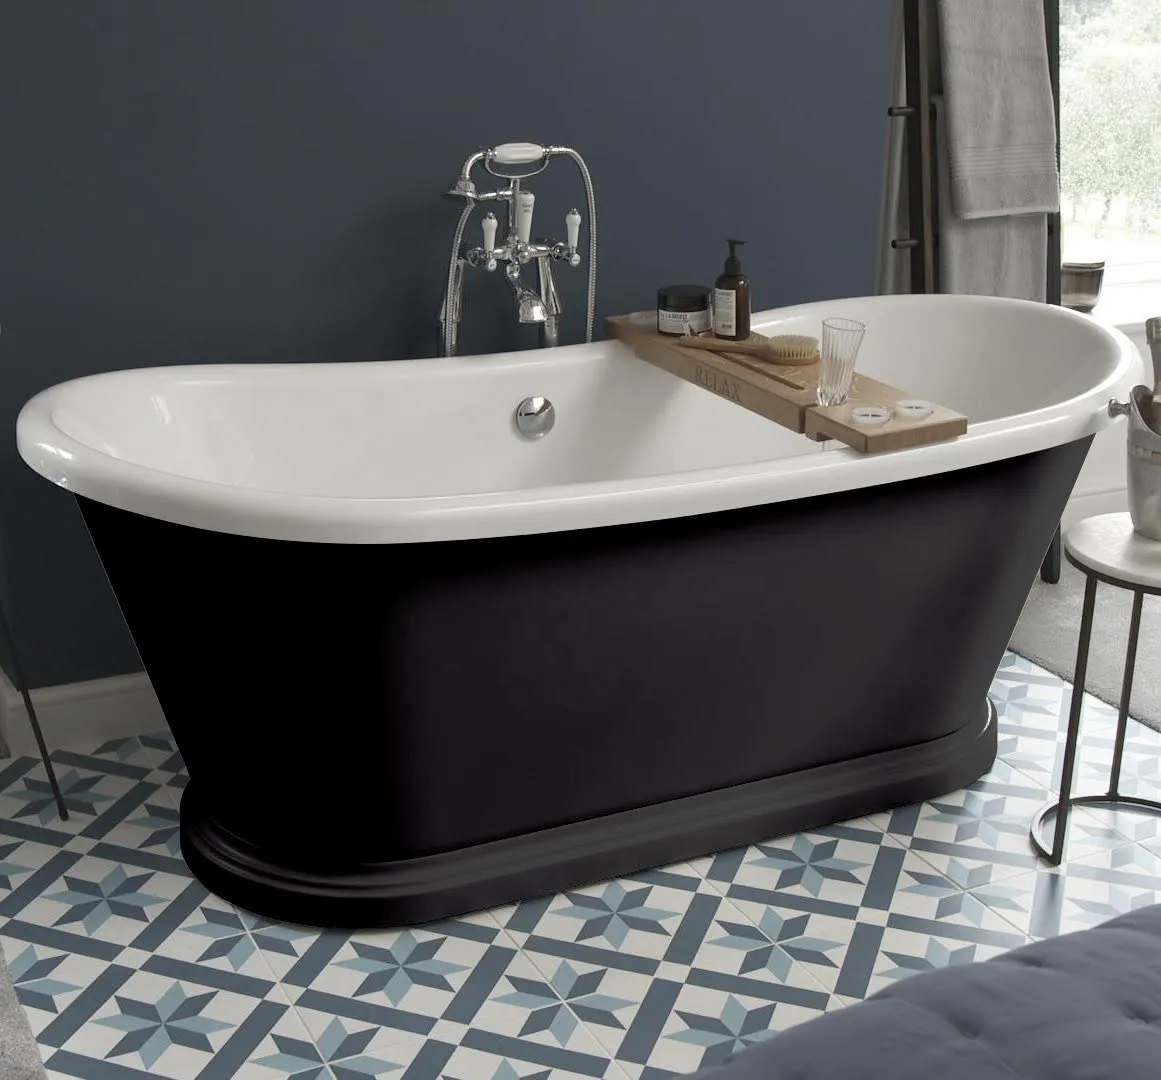 BC Designs Boat Bath Painted Farrow and Ball Pitch Black 1580 x 750mm